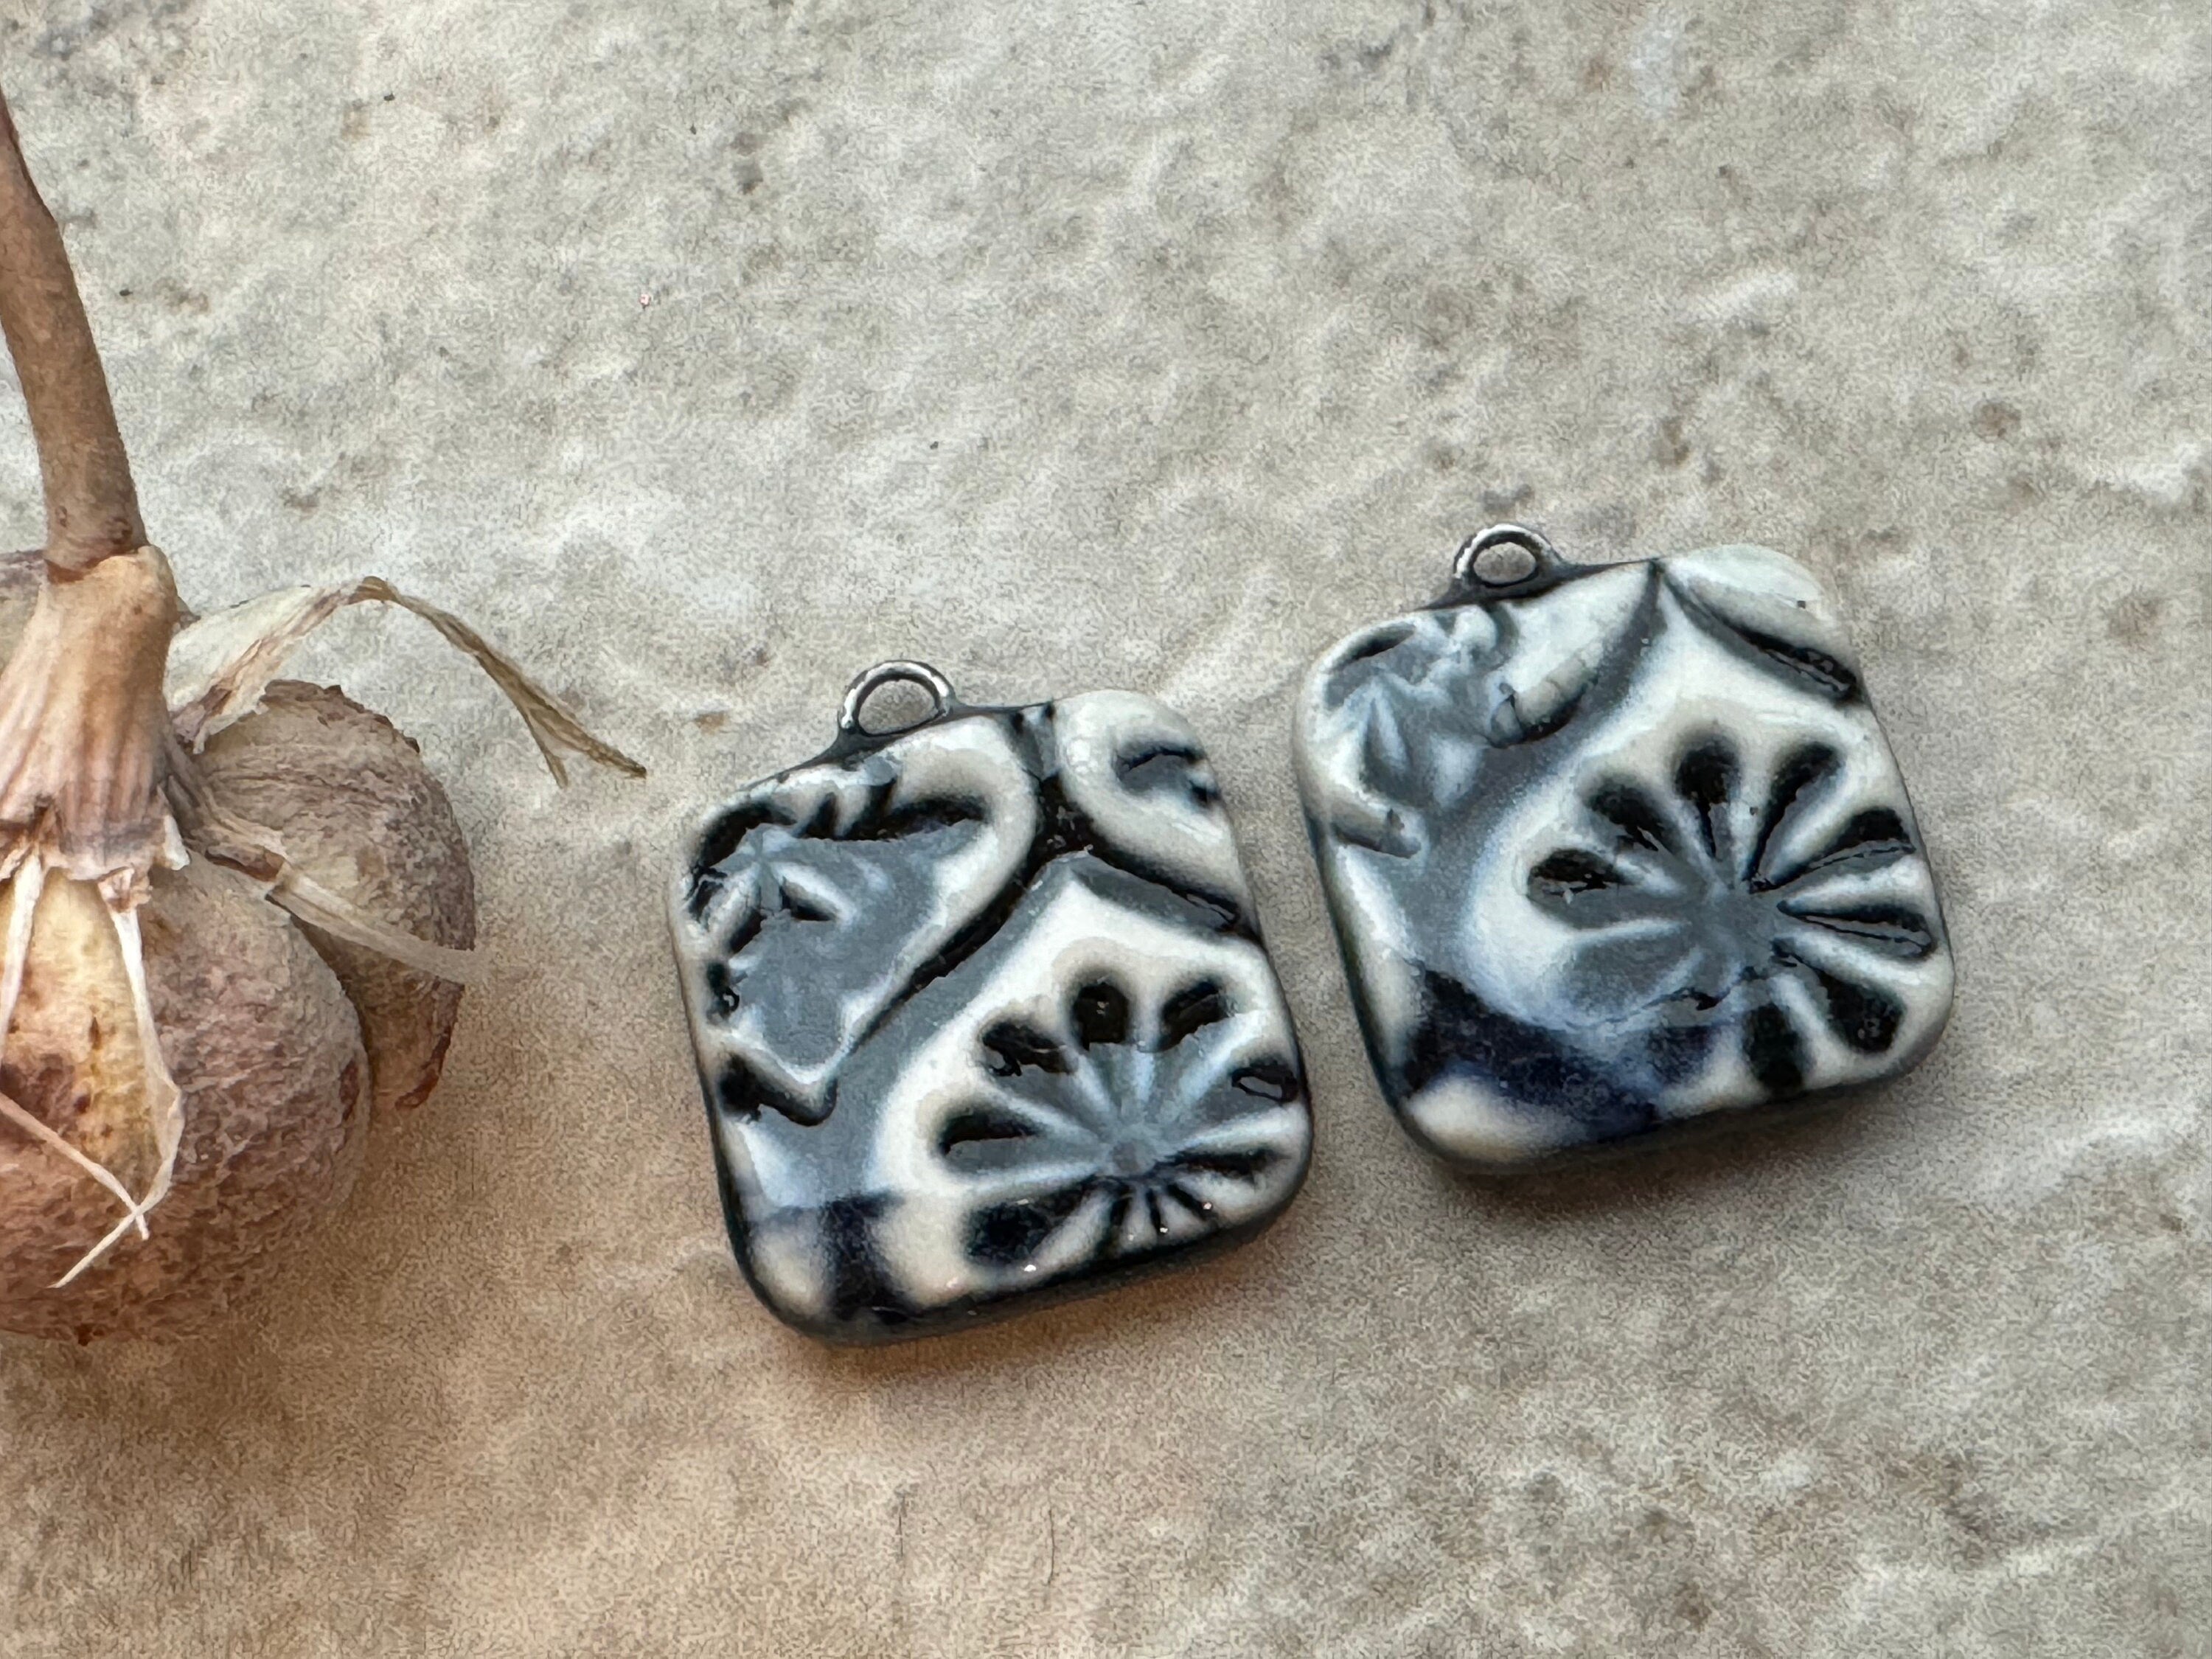 Black and White Talavera Tile Beads, Black and White Earring Bead Pair, Porcelain Ceramic Charms, Jewelry Components, Beading Handmade